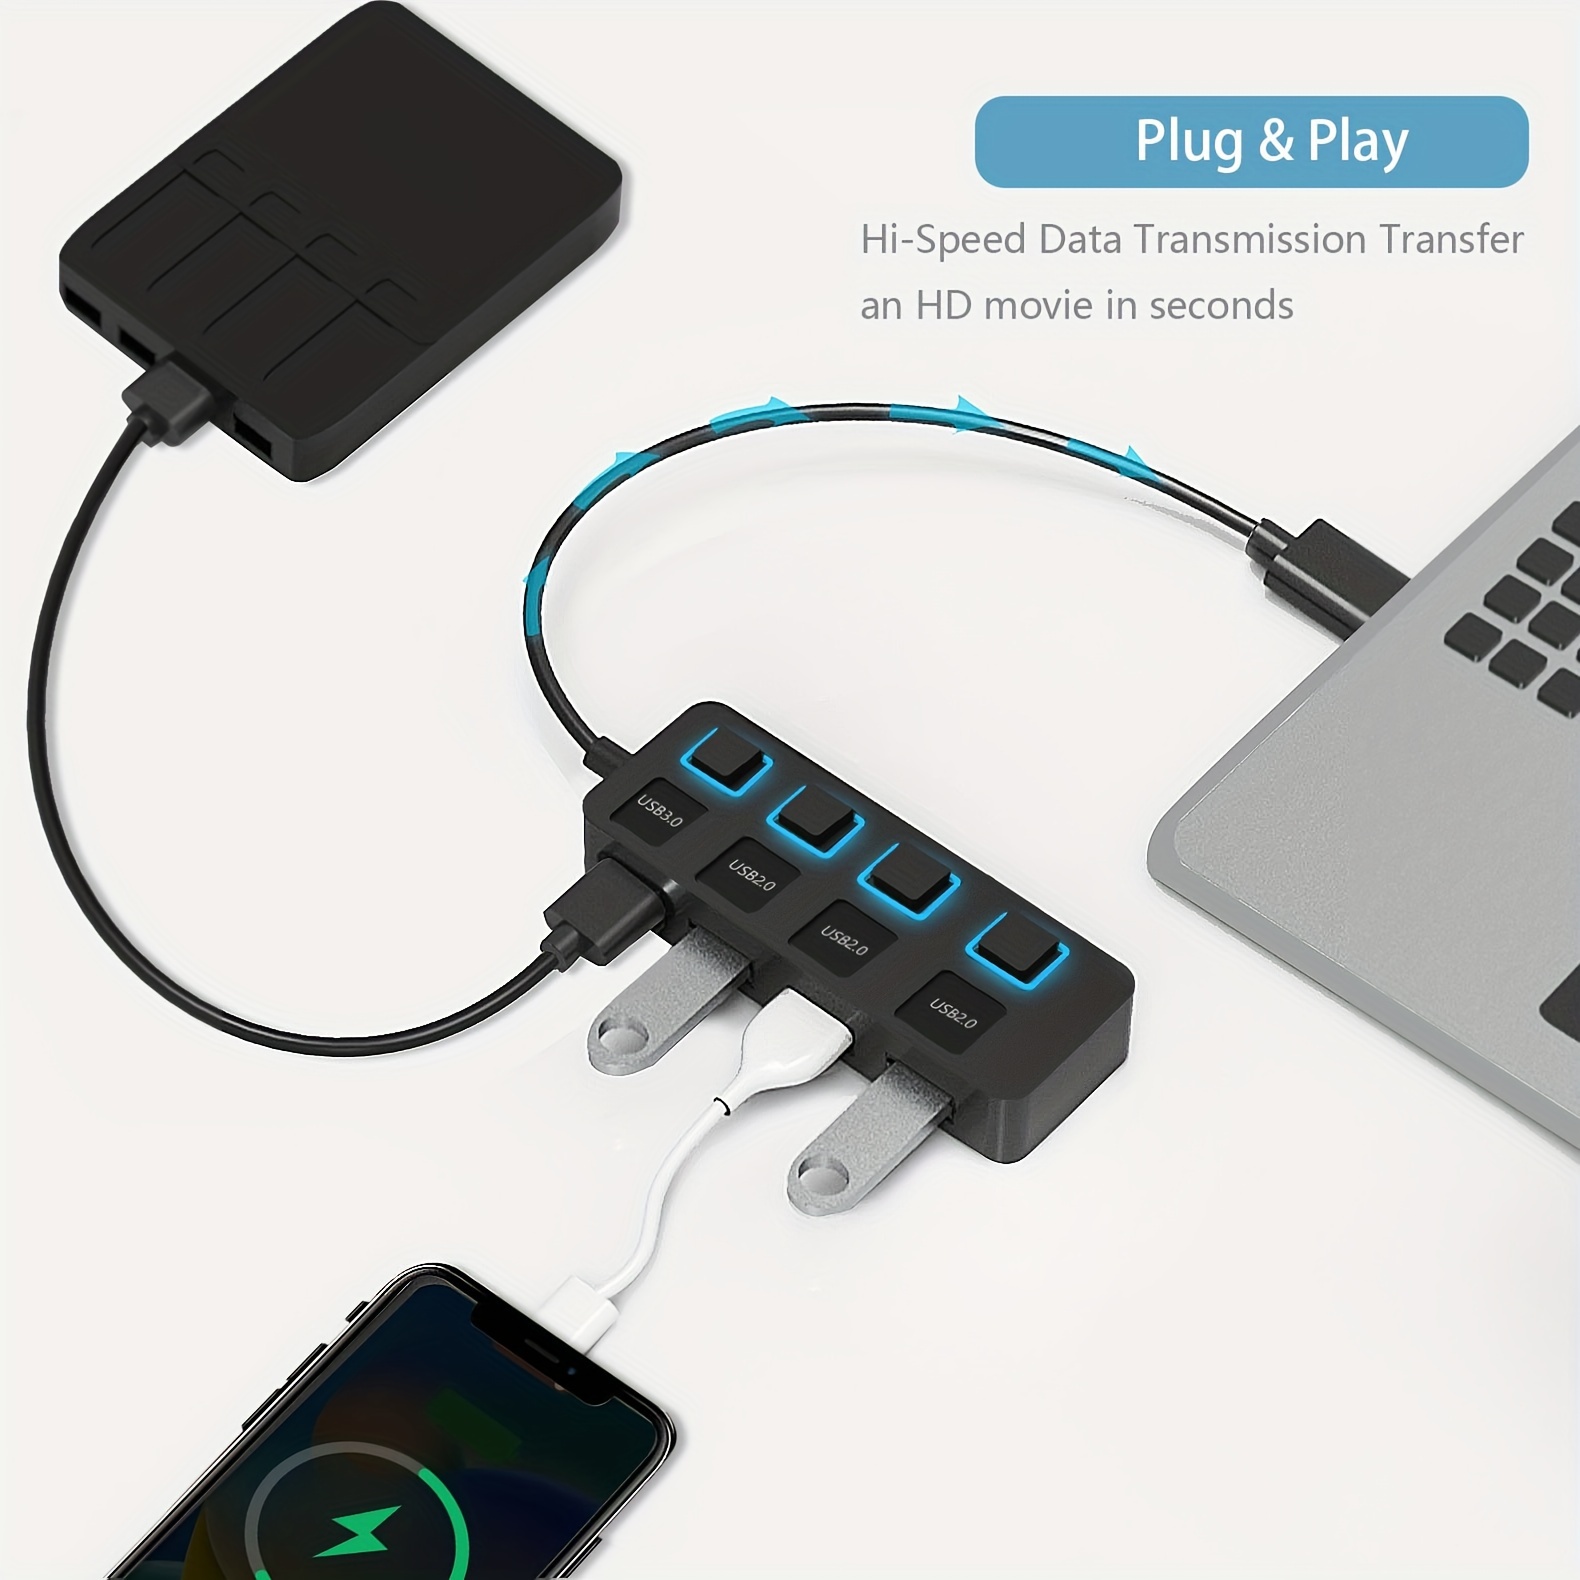 Sabrent USB 3.0 4-Port Hub with Individual Power Switches